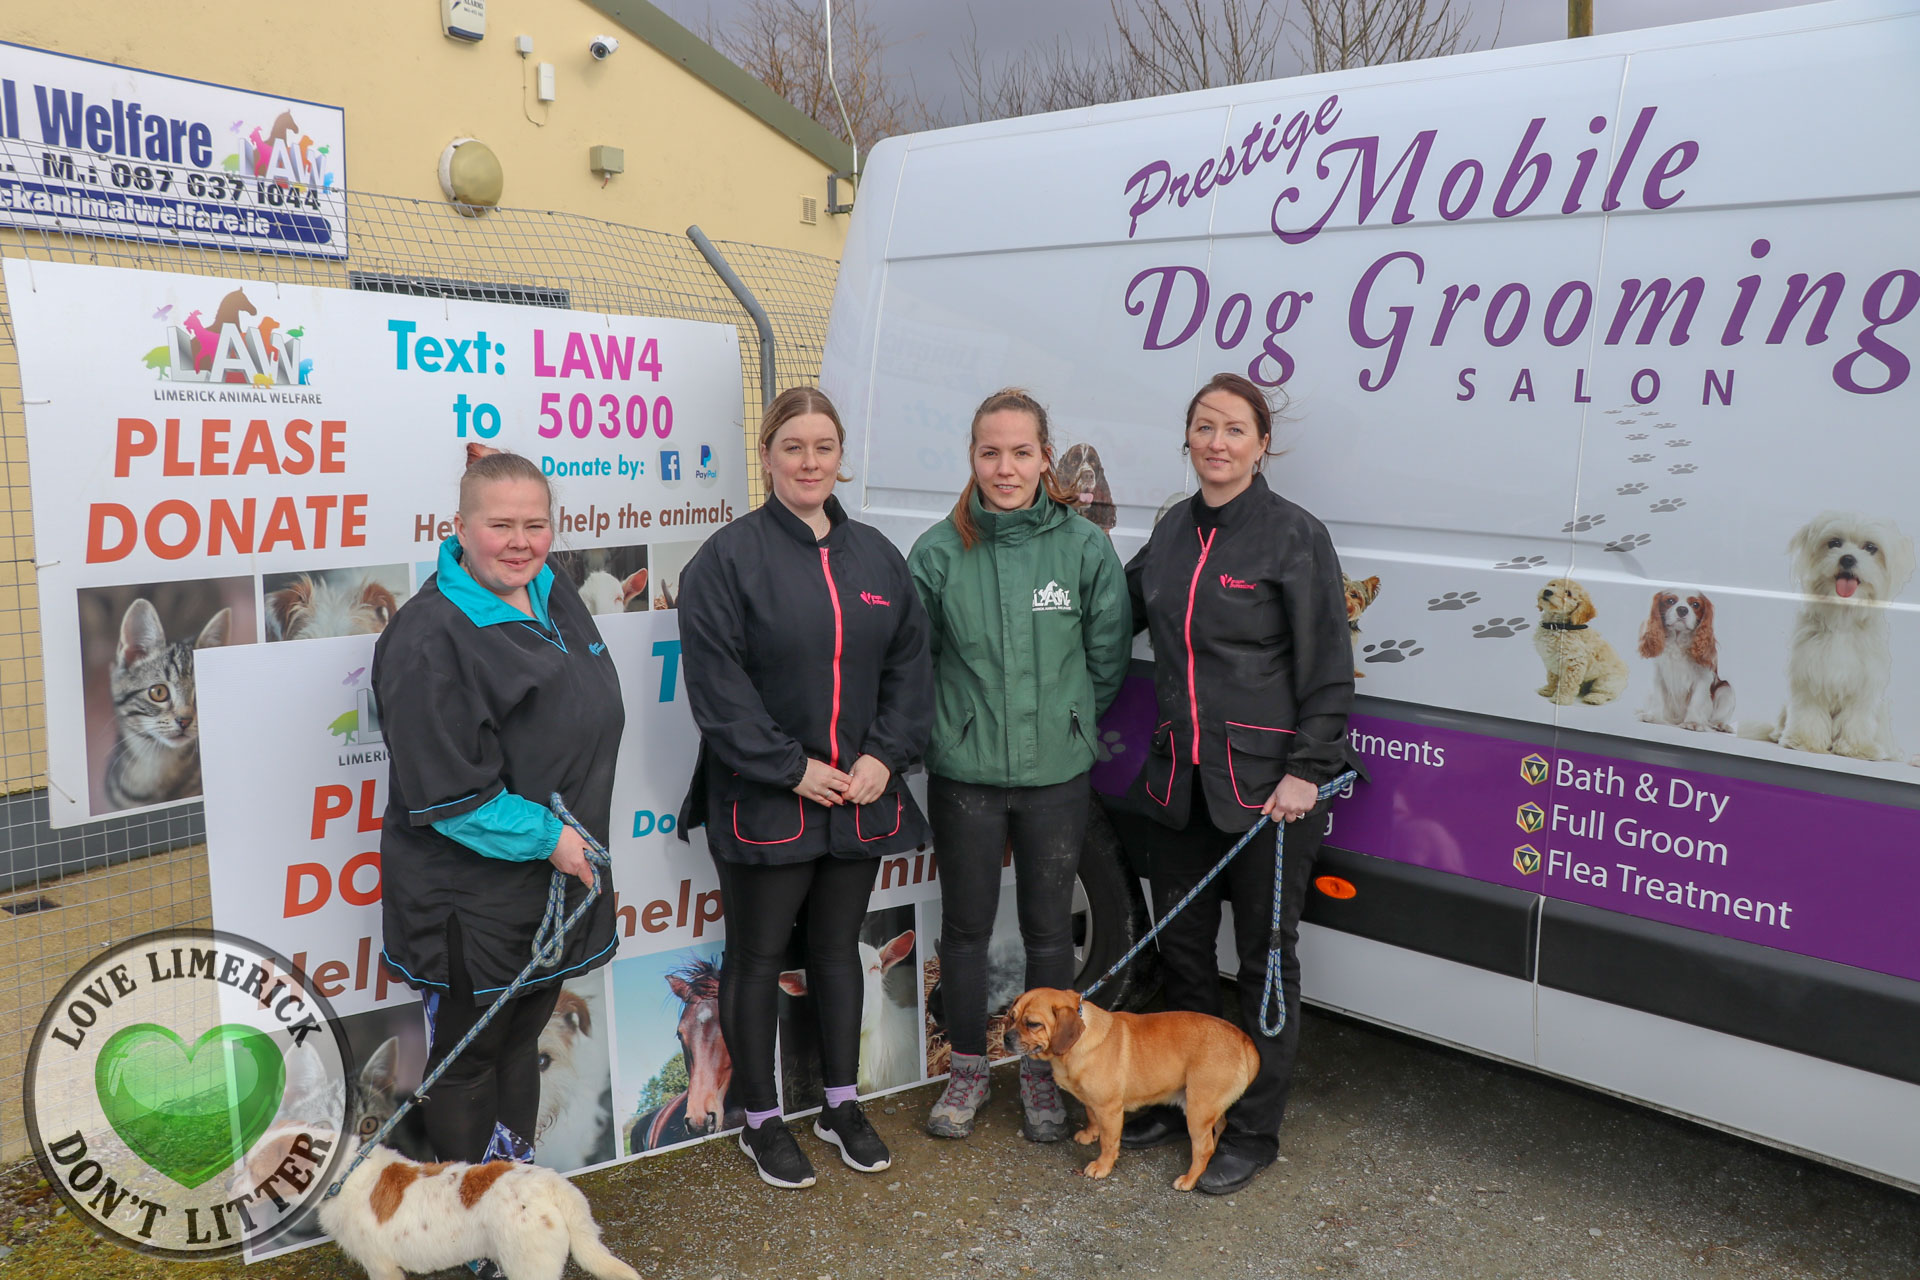 Prestige Dog Grooming 600K - Limerick-based dog grooming company Prestige Dog Grooming are challenging themselves to a 600K walkathon in aid of Limerick Animal Welfare. Pictured are Renata and Sophie from Prestige with Lisa Doherty, Assistant Manager of Limerick Animal Welfare and and Tracey from Prestige Dog Grooming. Picture: Richard Lynch/ilovelimerick